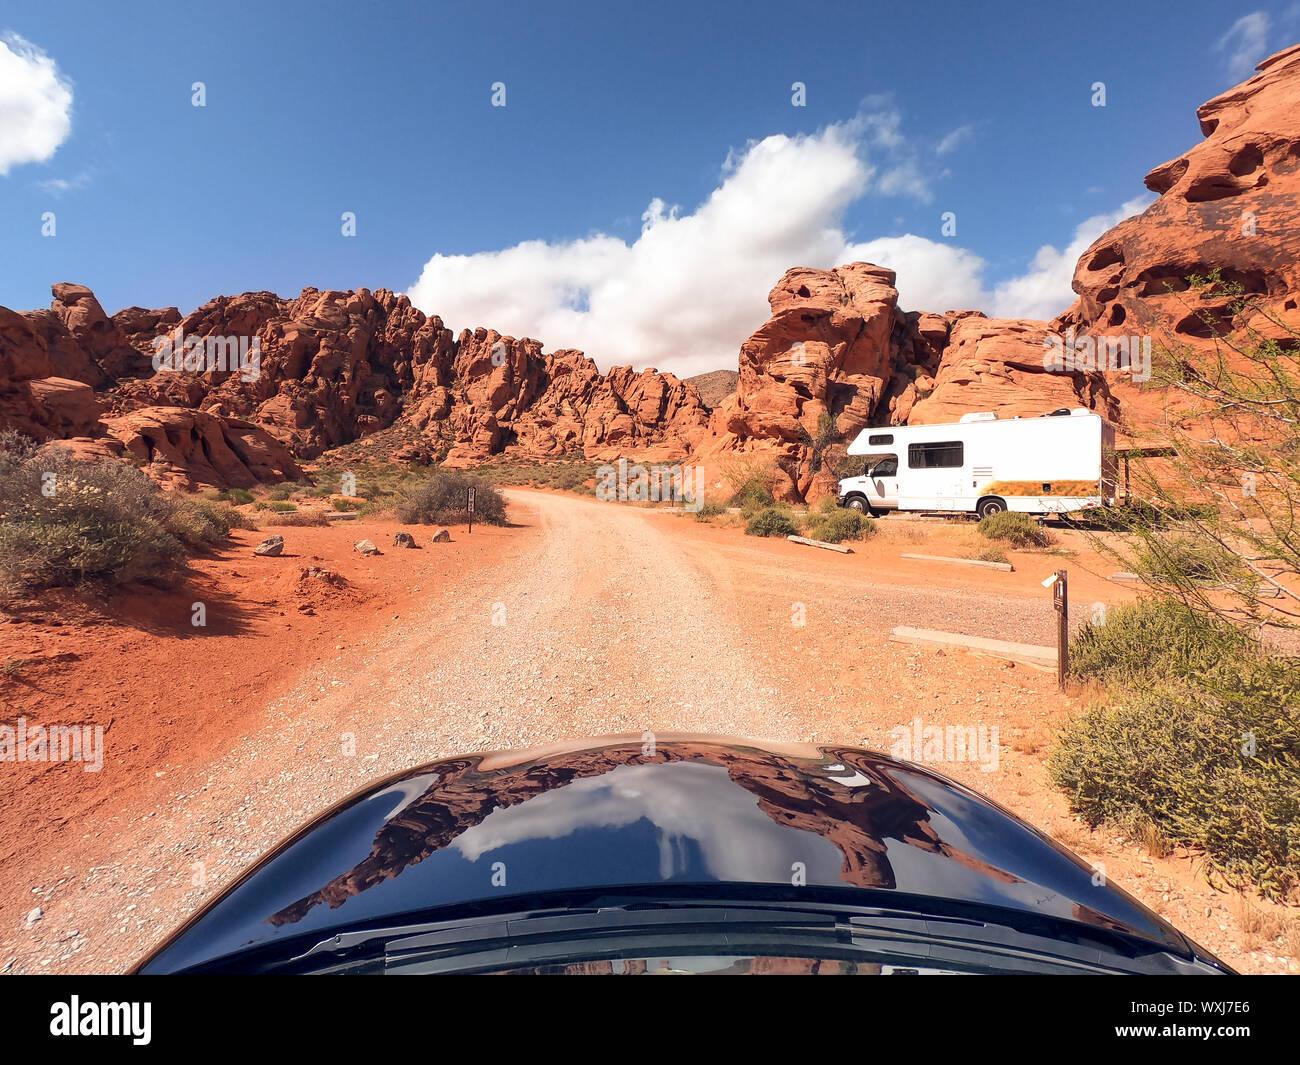 Car approaching a camping location, Grand Canyon National Park, Arizona, United States Stock Photo